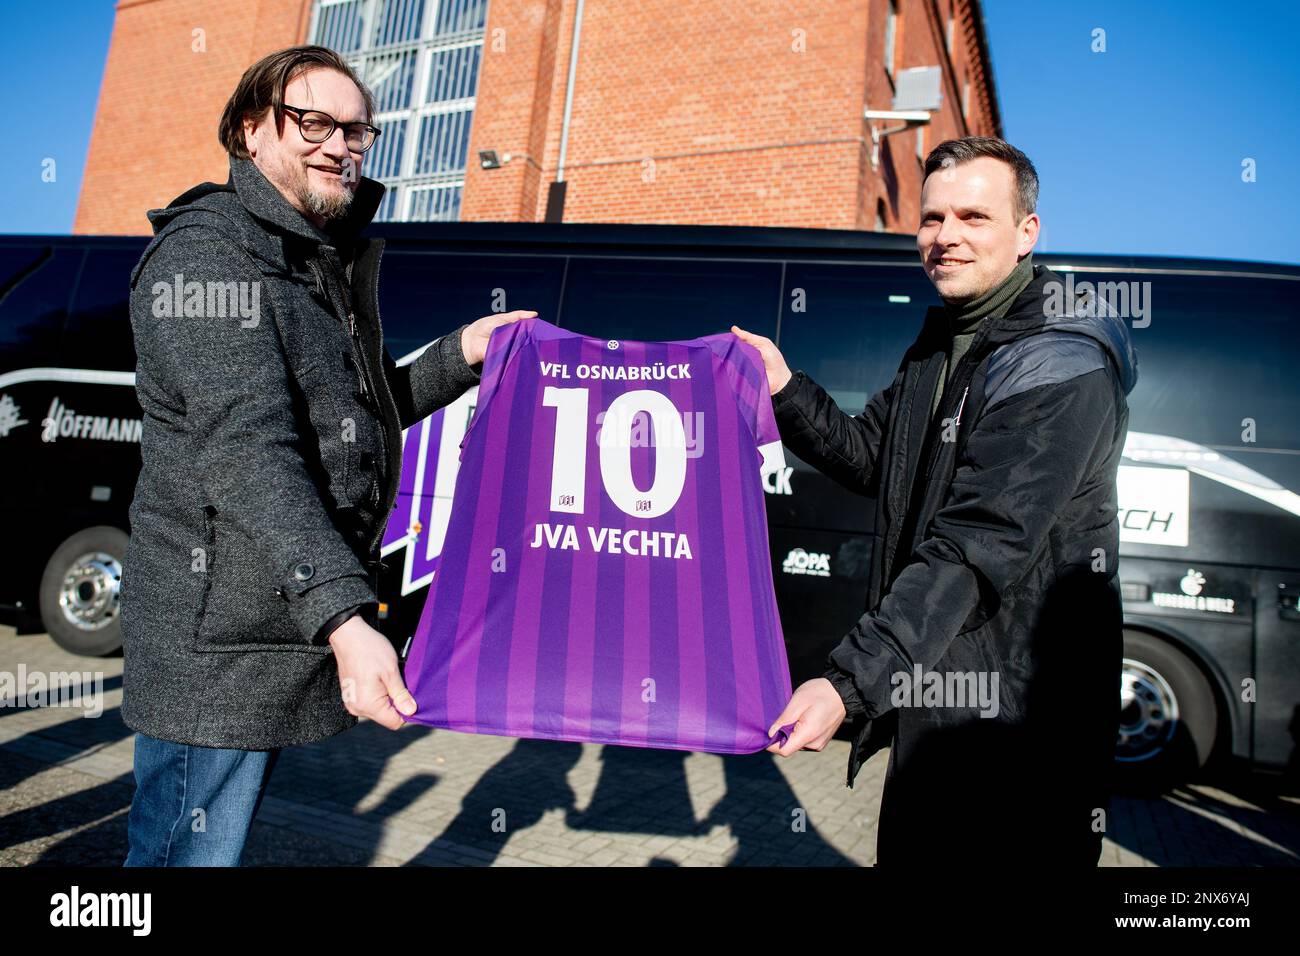 Vechta, Germany. 28th Feb, 2023. Michael Welling (l), managing director of VfL Osnabrück, and Sebastian Rüther, press officer of VfL Osnabrück, stand in the courtyard of the correctional facility for young offenders with a jersey of the club. The Vechta correctional facility and VfL Osnabrück have presented their cooperation in the initiative 'Anstoß für ein neues Leben' (impetus for a new life). The project of the Sepp Herberger Foundation of the German Football Association (DFB) is about the resocialization of young prisoners. Credit: Hauke-Christian Dittrich/dpa/Alamy Live News Stock Photo